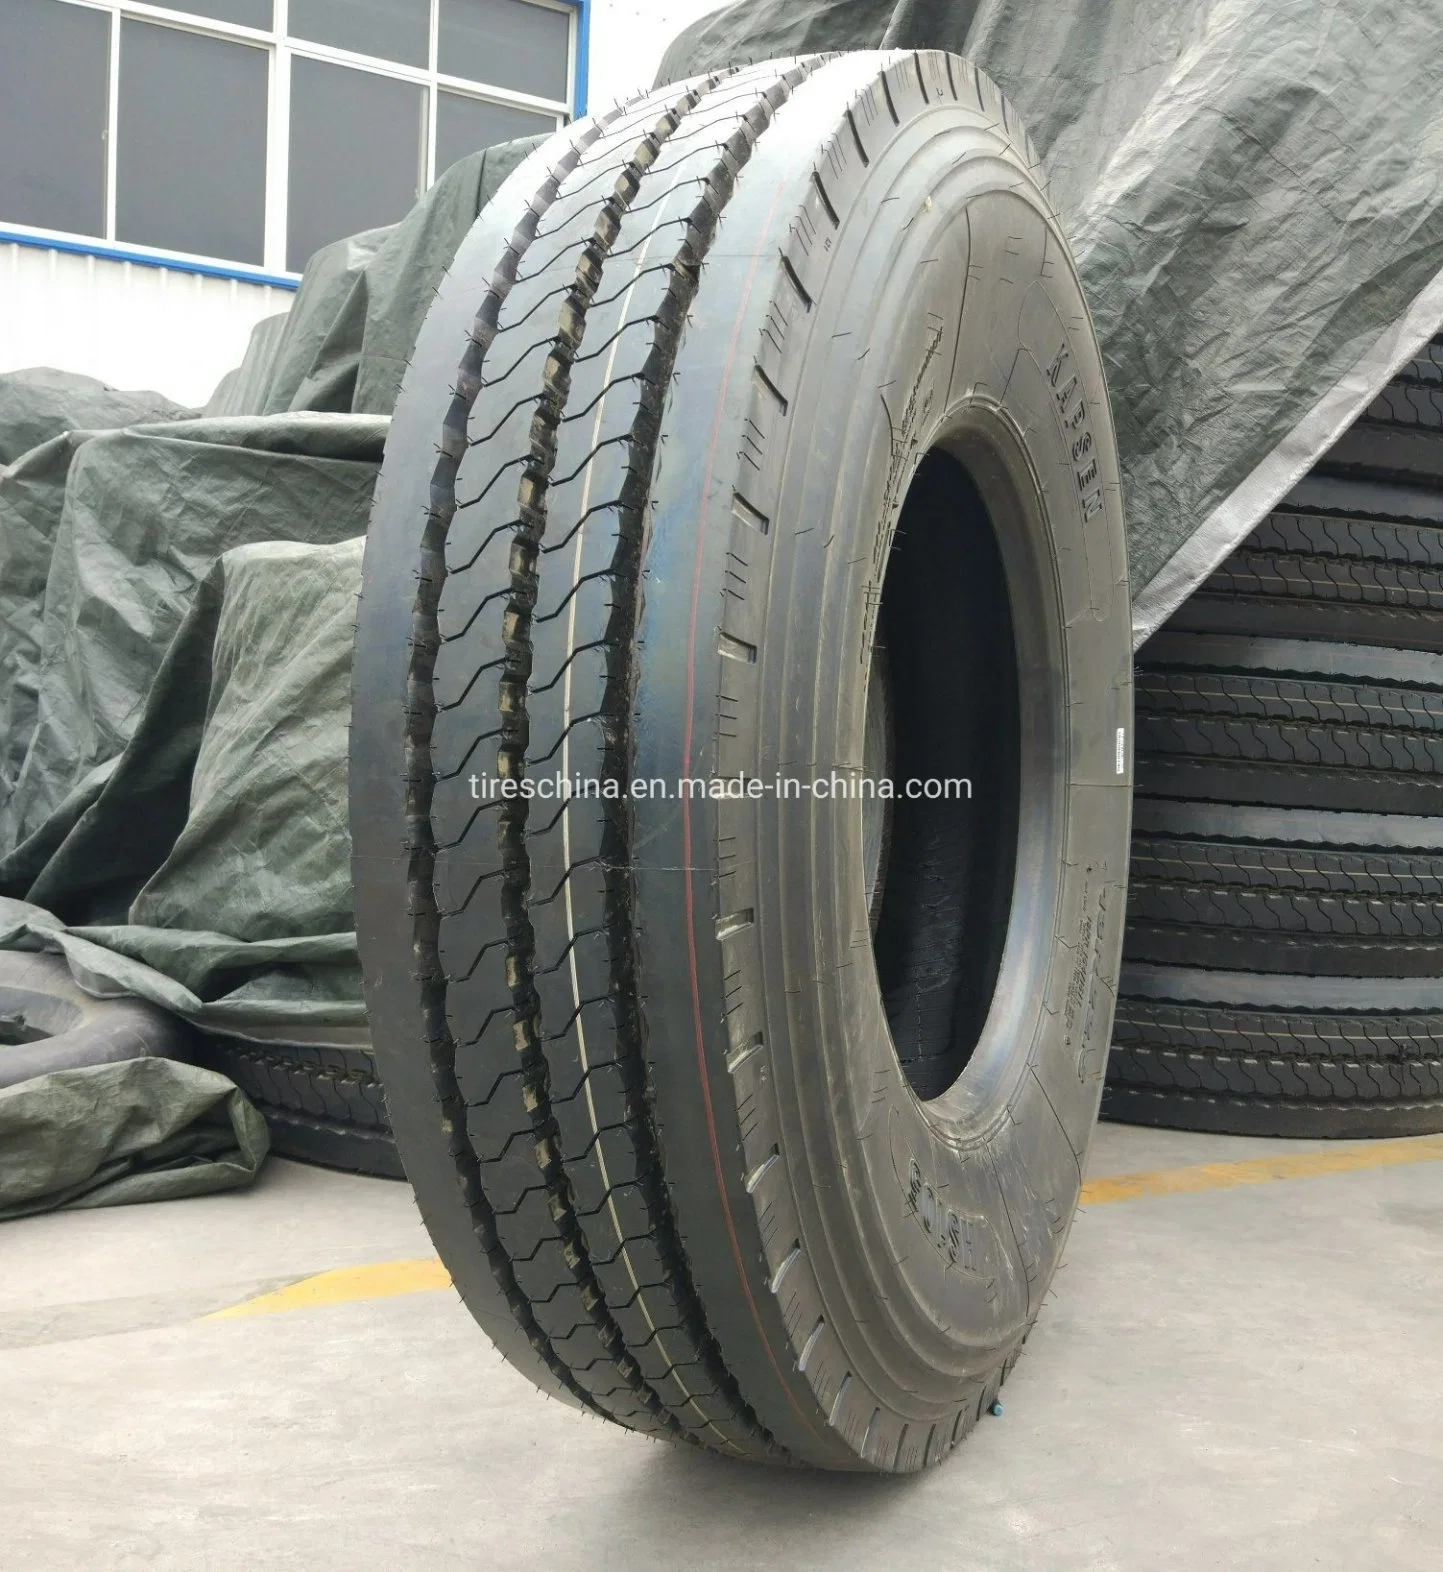 Wholesaler Kapsen/Taitong/Terraking Factory TBR Tyre Price 13/22.5 13r22.5-18pr HS105 154/151L All Steel All Wheel Position Heavy Truck and Bus Radial Tire